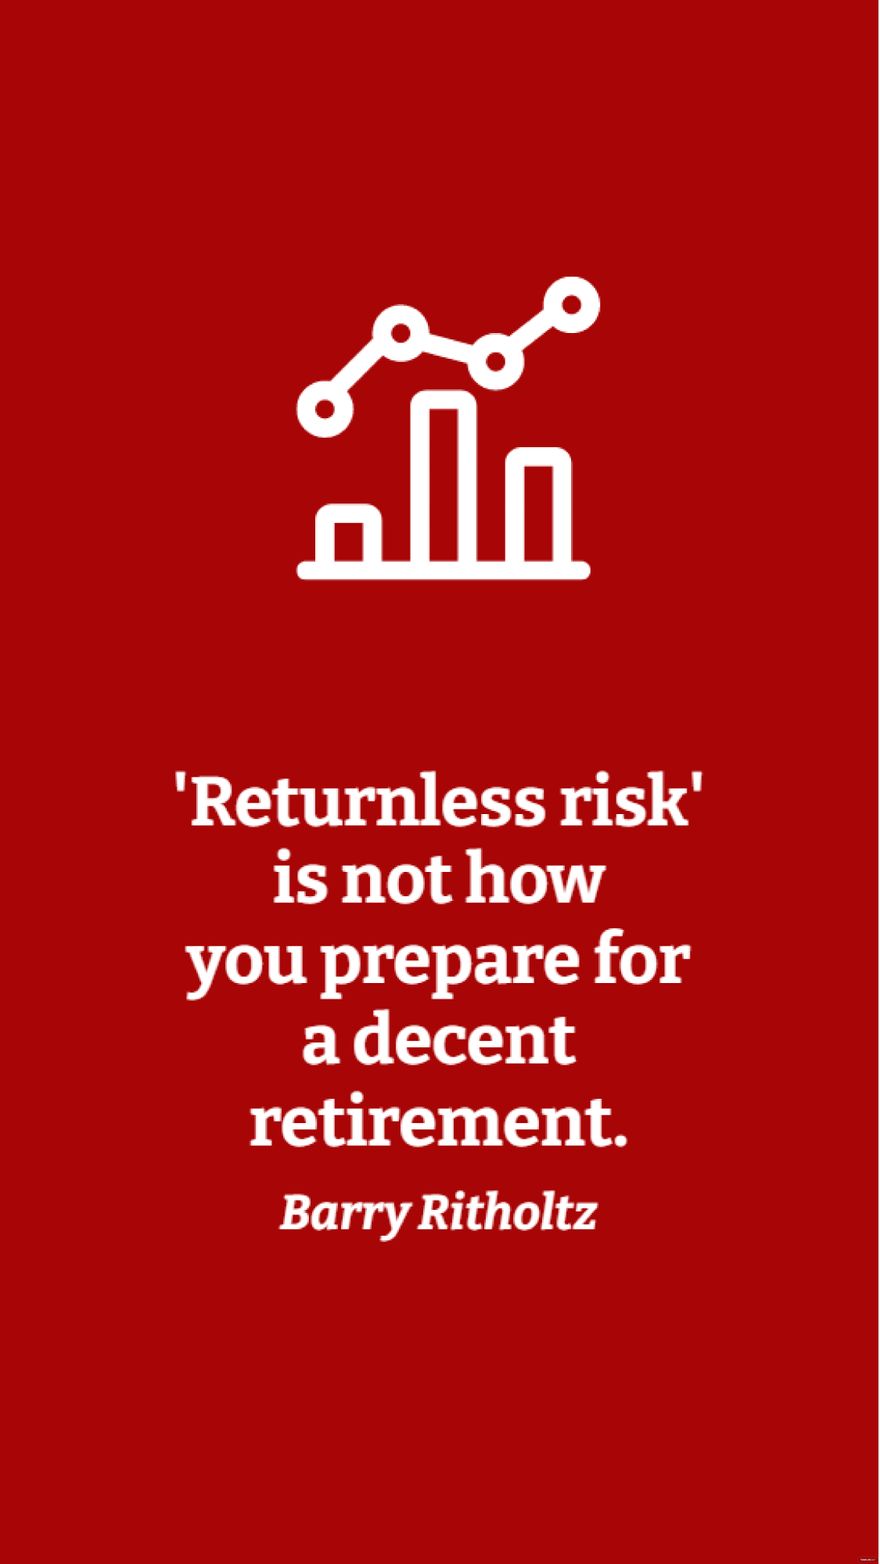 Barry Ritholtz - 'Returnless risk' is not how you prepare for a decent retirement.